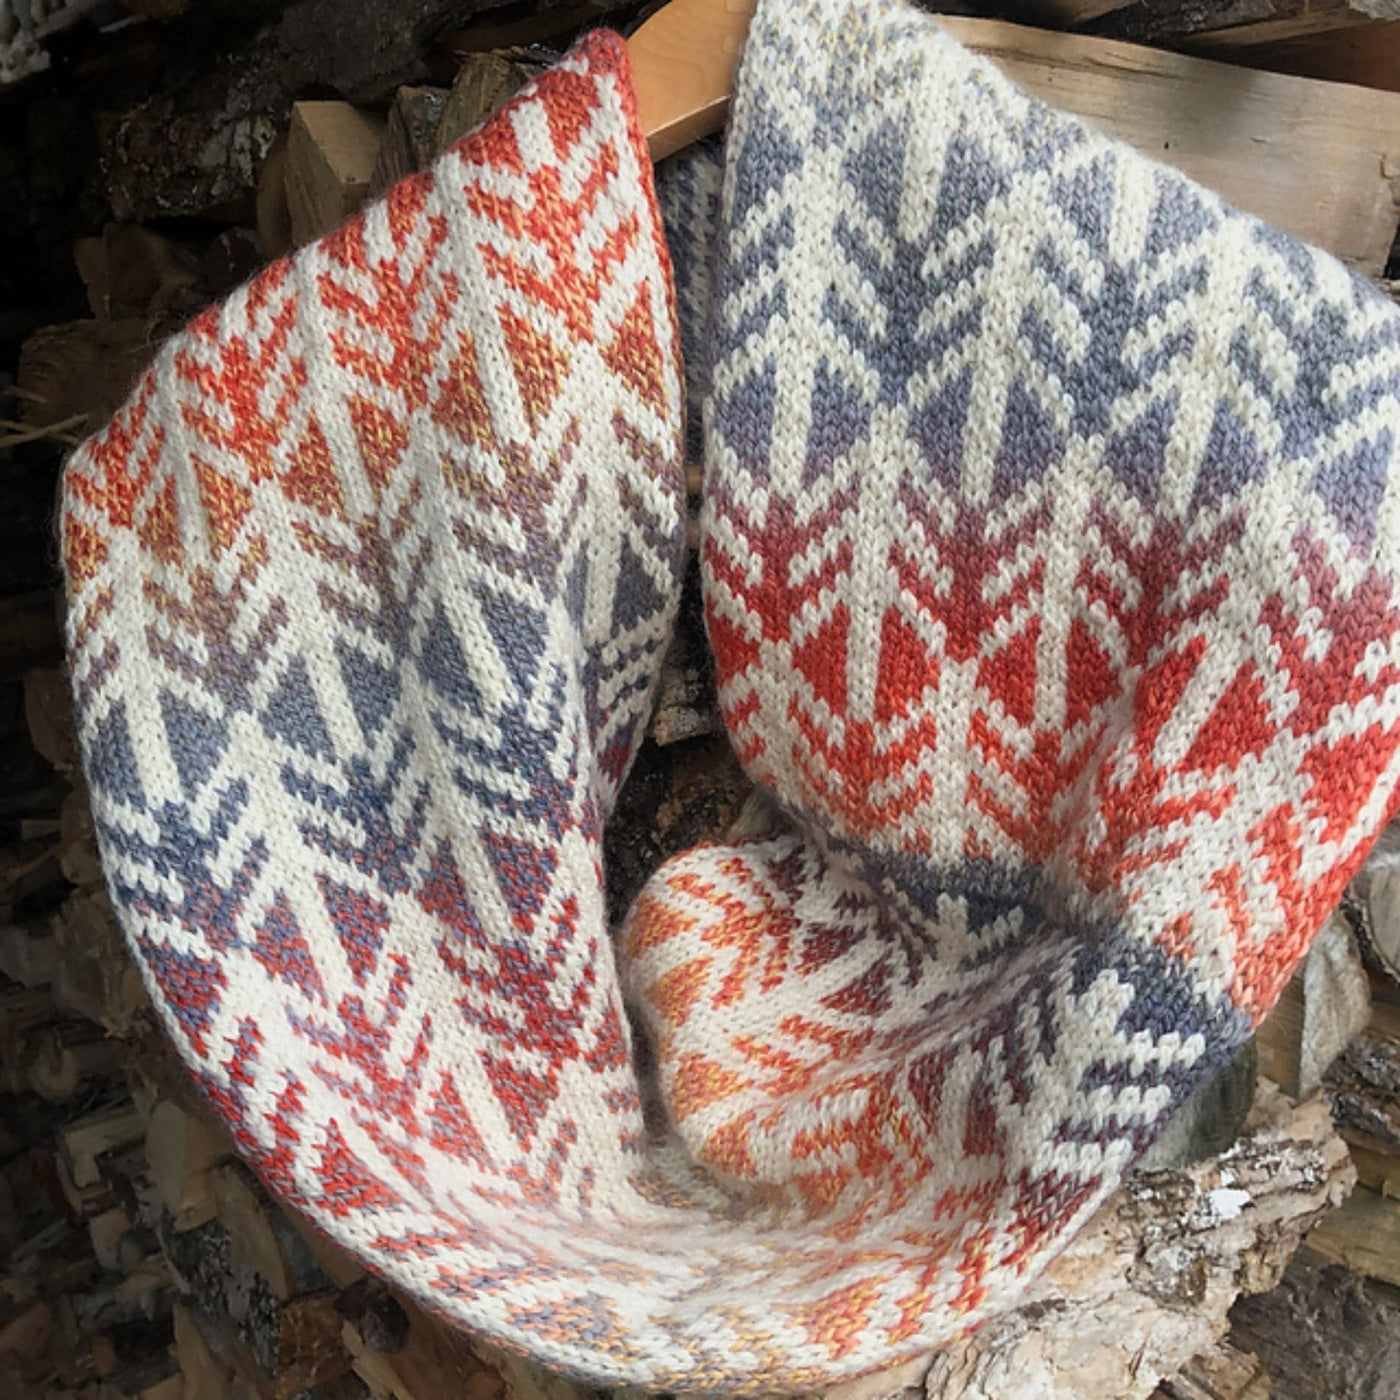 North Country Cowl by Mary O'Shea in Making Tracks